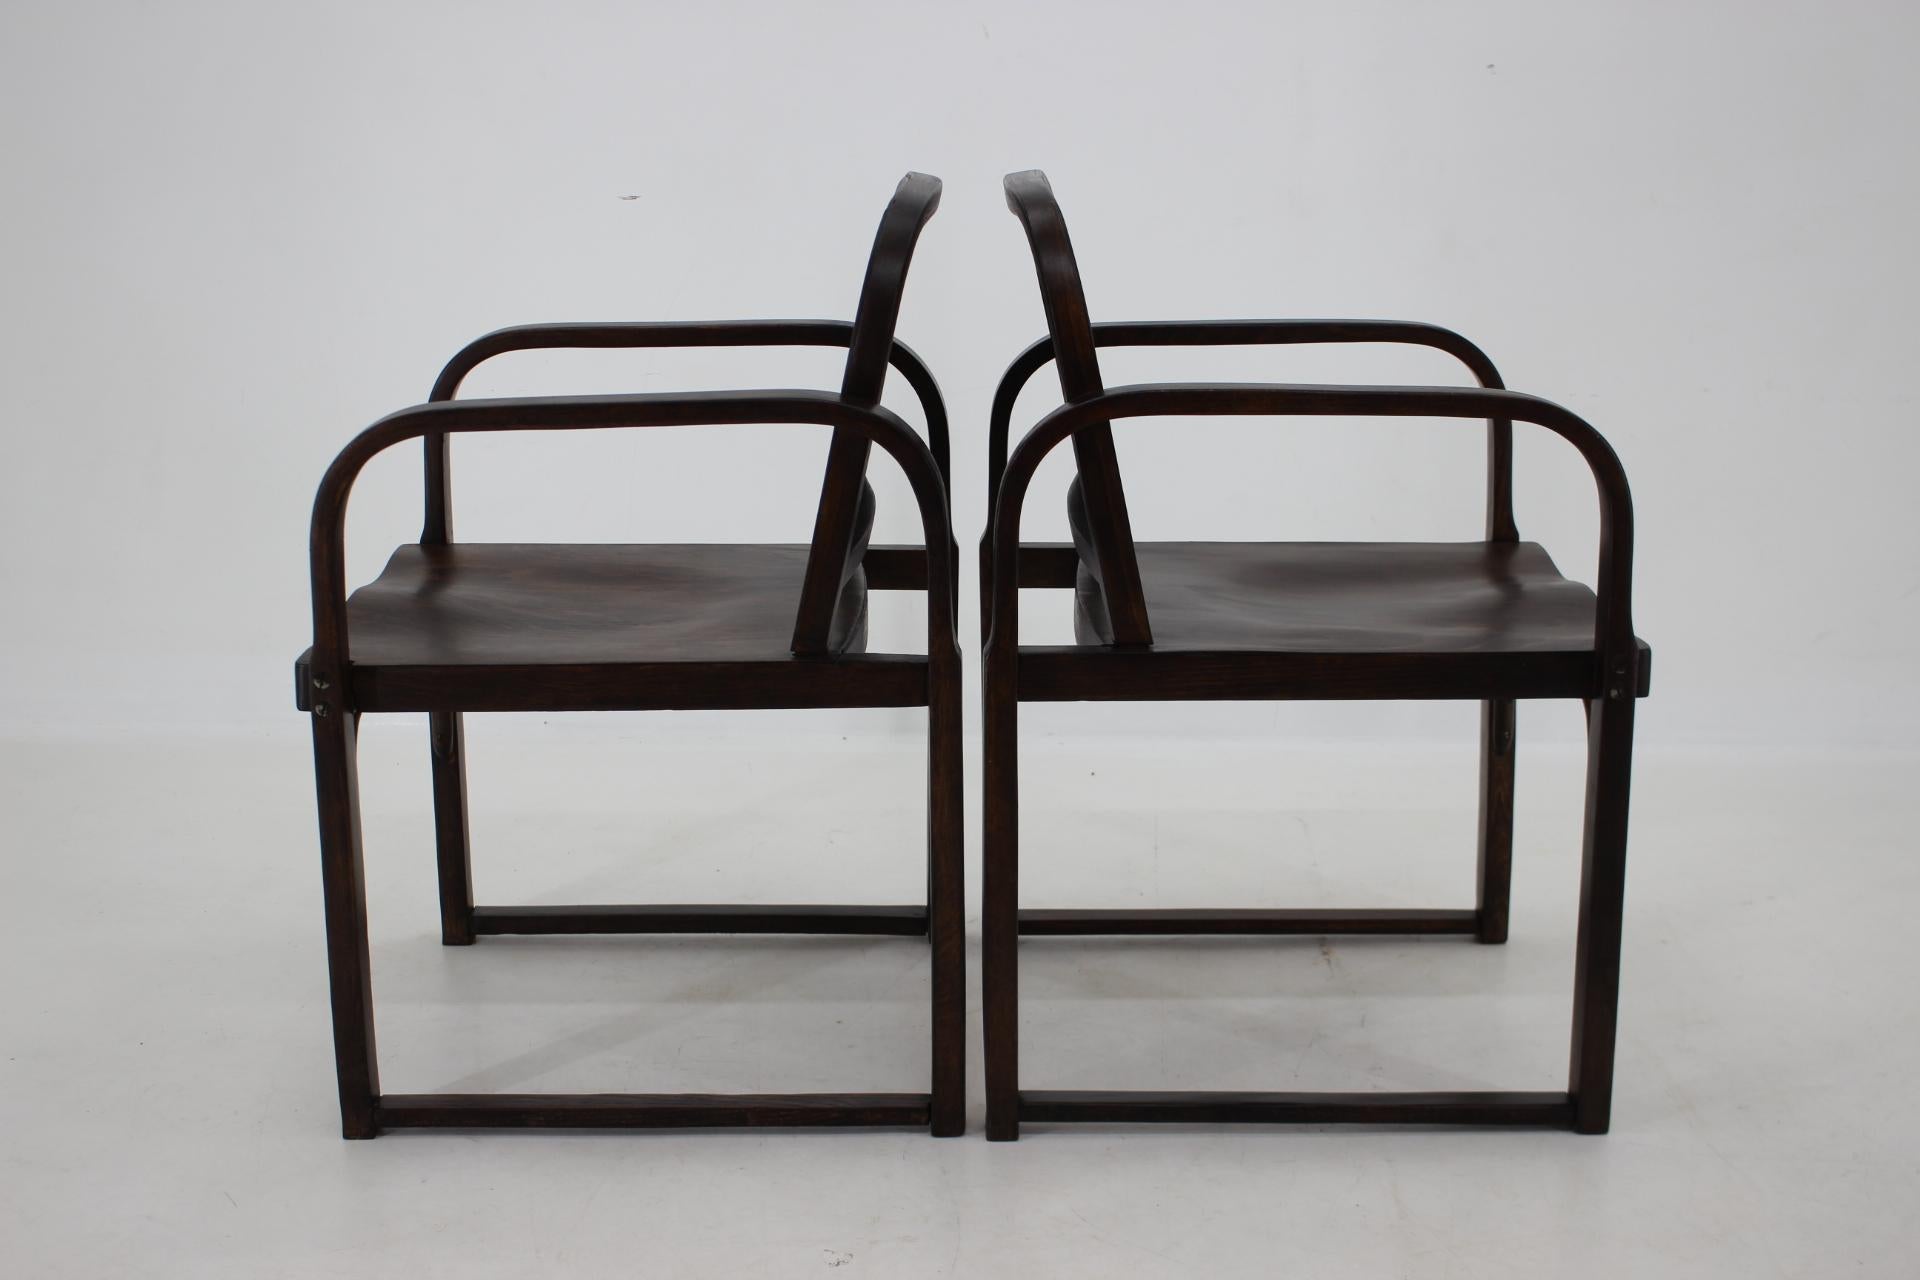 1930s Pair of Thonet Bentwood Armchairs A745 by Tatra, Czechoslovakia For Sale 3